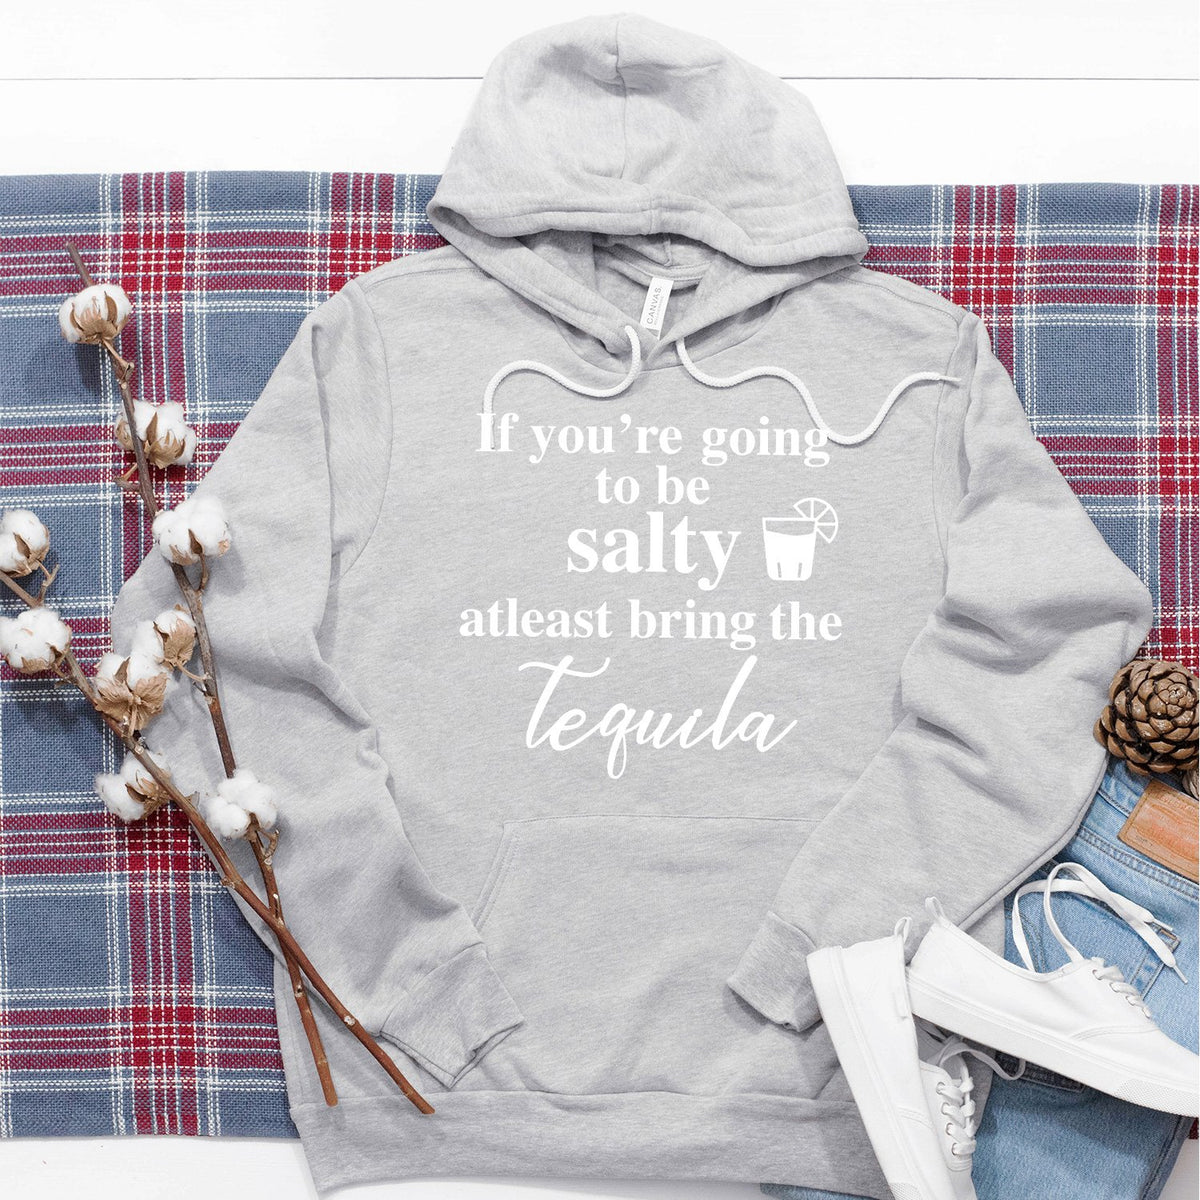 If You&#39;re Going to be Salty At Least Bring the Tequila - Hoodie Sweatshirt